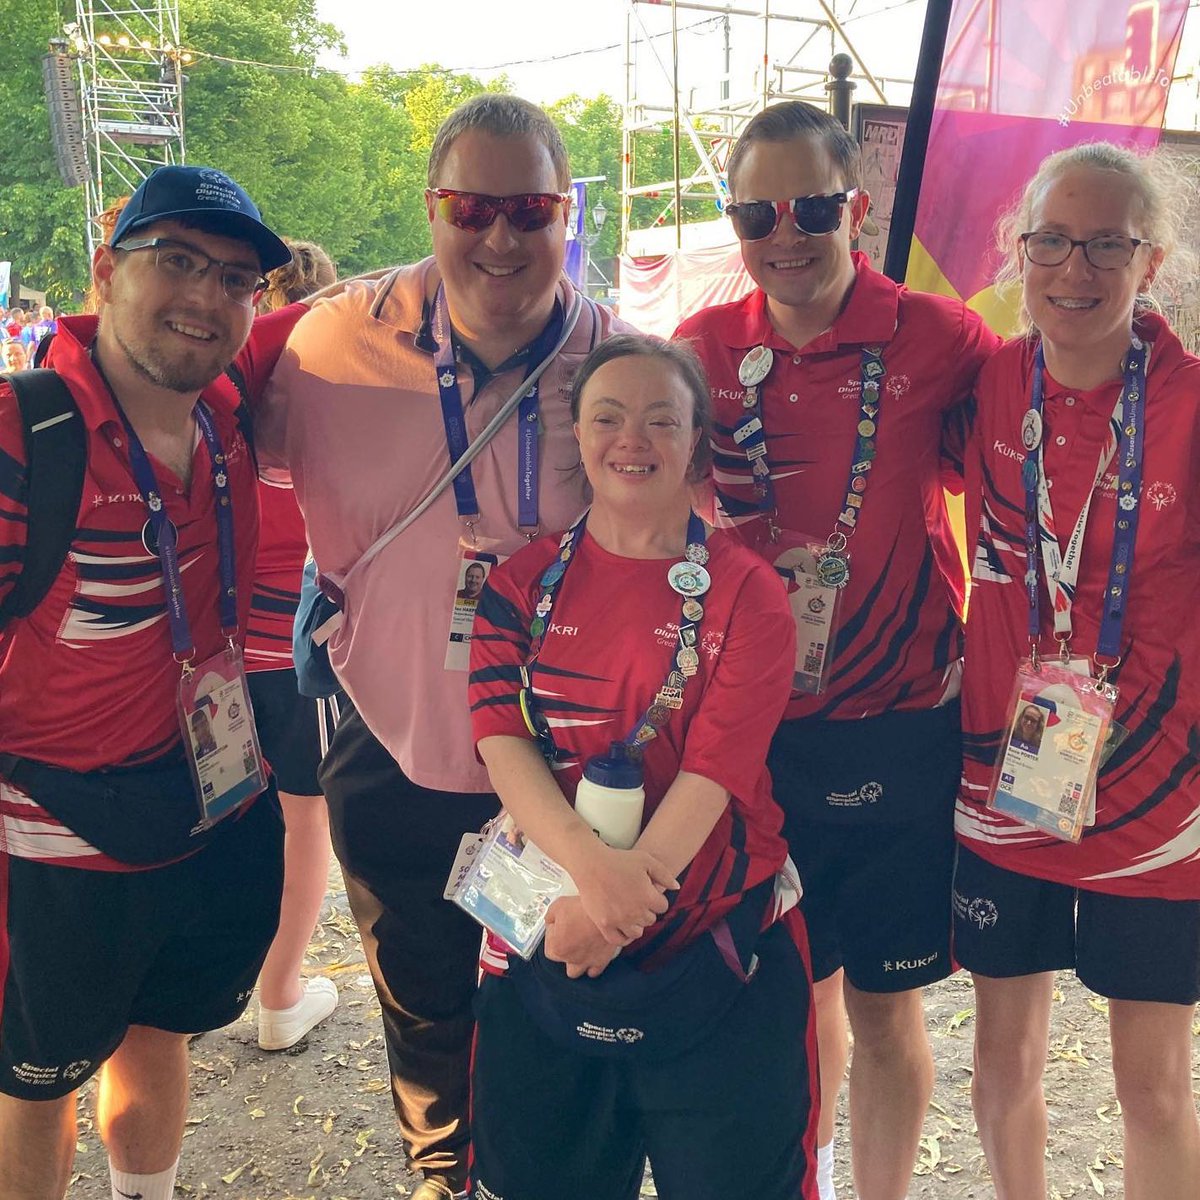 Celebrating my #SpecialOlympics journey. Come and find out more at instagram.com/sojohnhayes

Fantastic seeing Ian, looking forward to seeing him back running.

#UnbeatableTogether #SpecialOlympicsWorldGames #TeamSOGB #FamilyTime